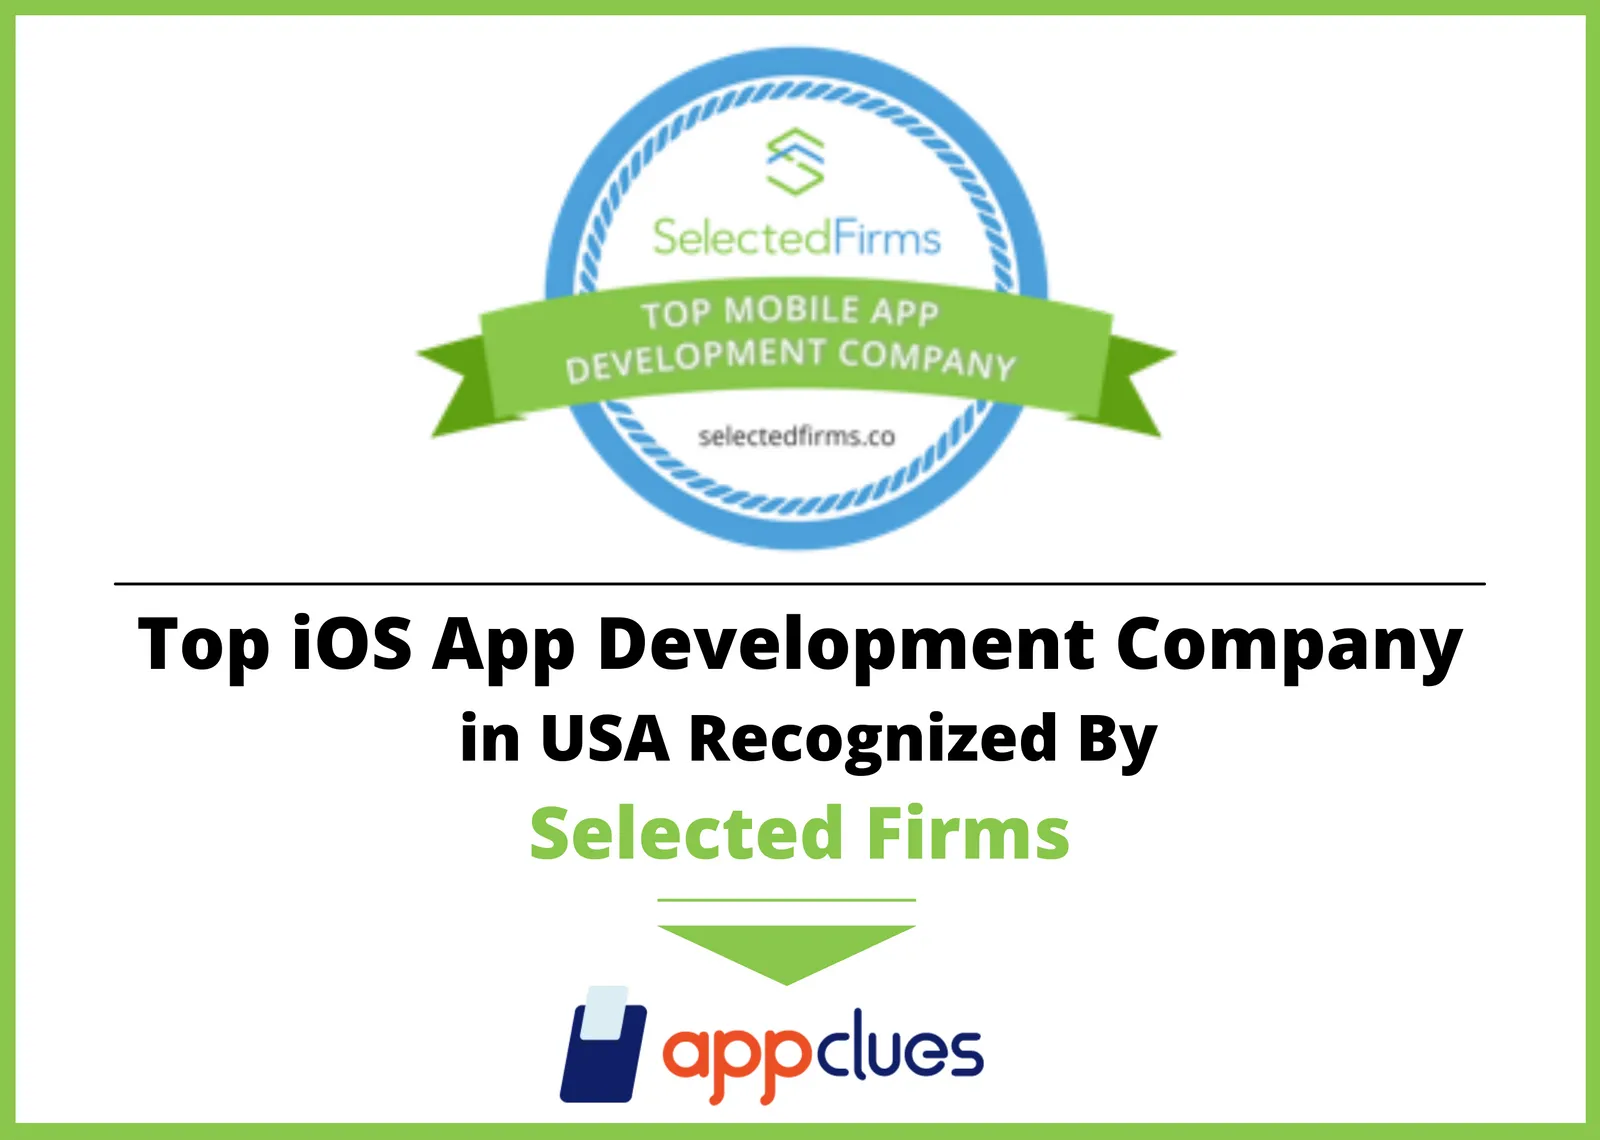 Top iOS App Development Companies in USA Recognized by Selected Firms